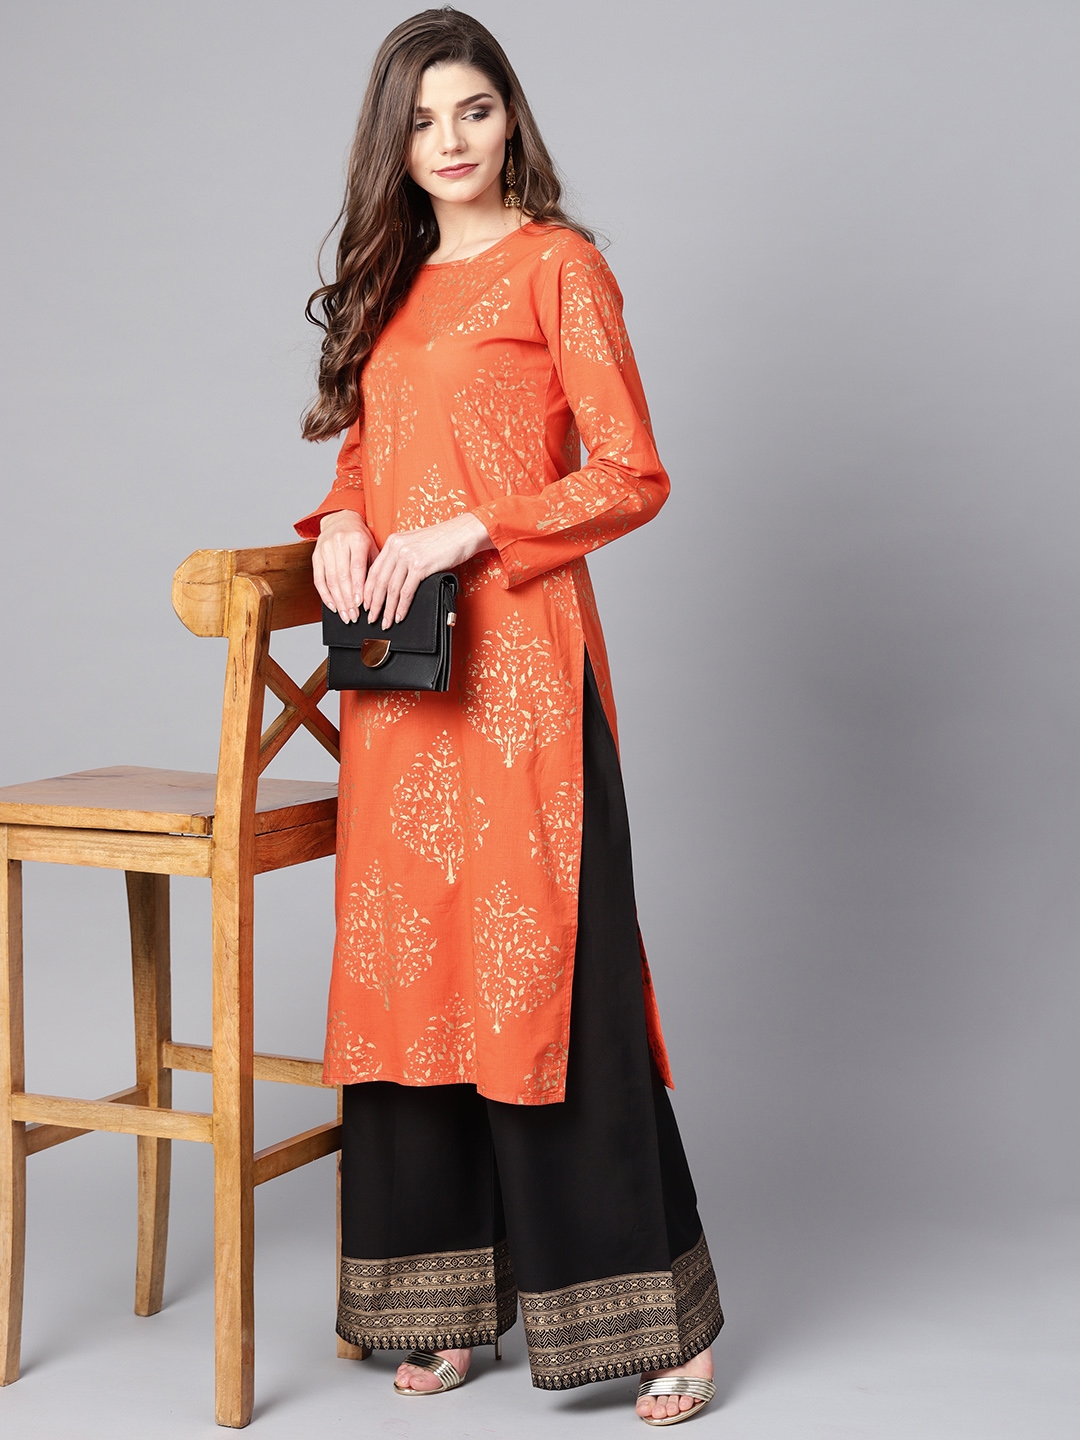 Women Fashionable Off Shoulder Kurti With Golden Flower Printed Long Shrug  in Orange Color with 3/